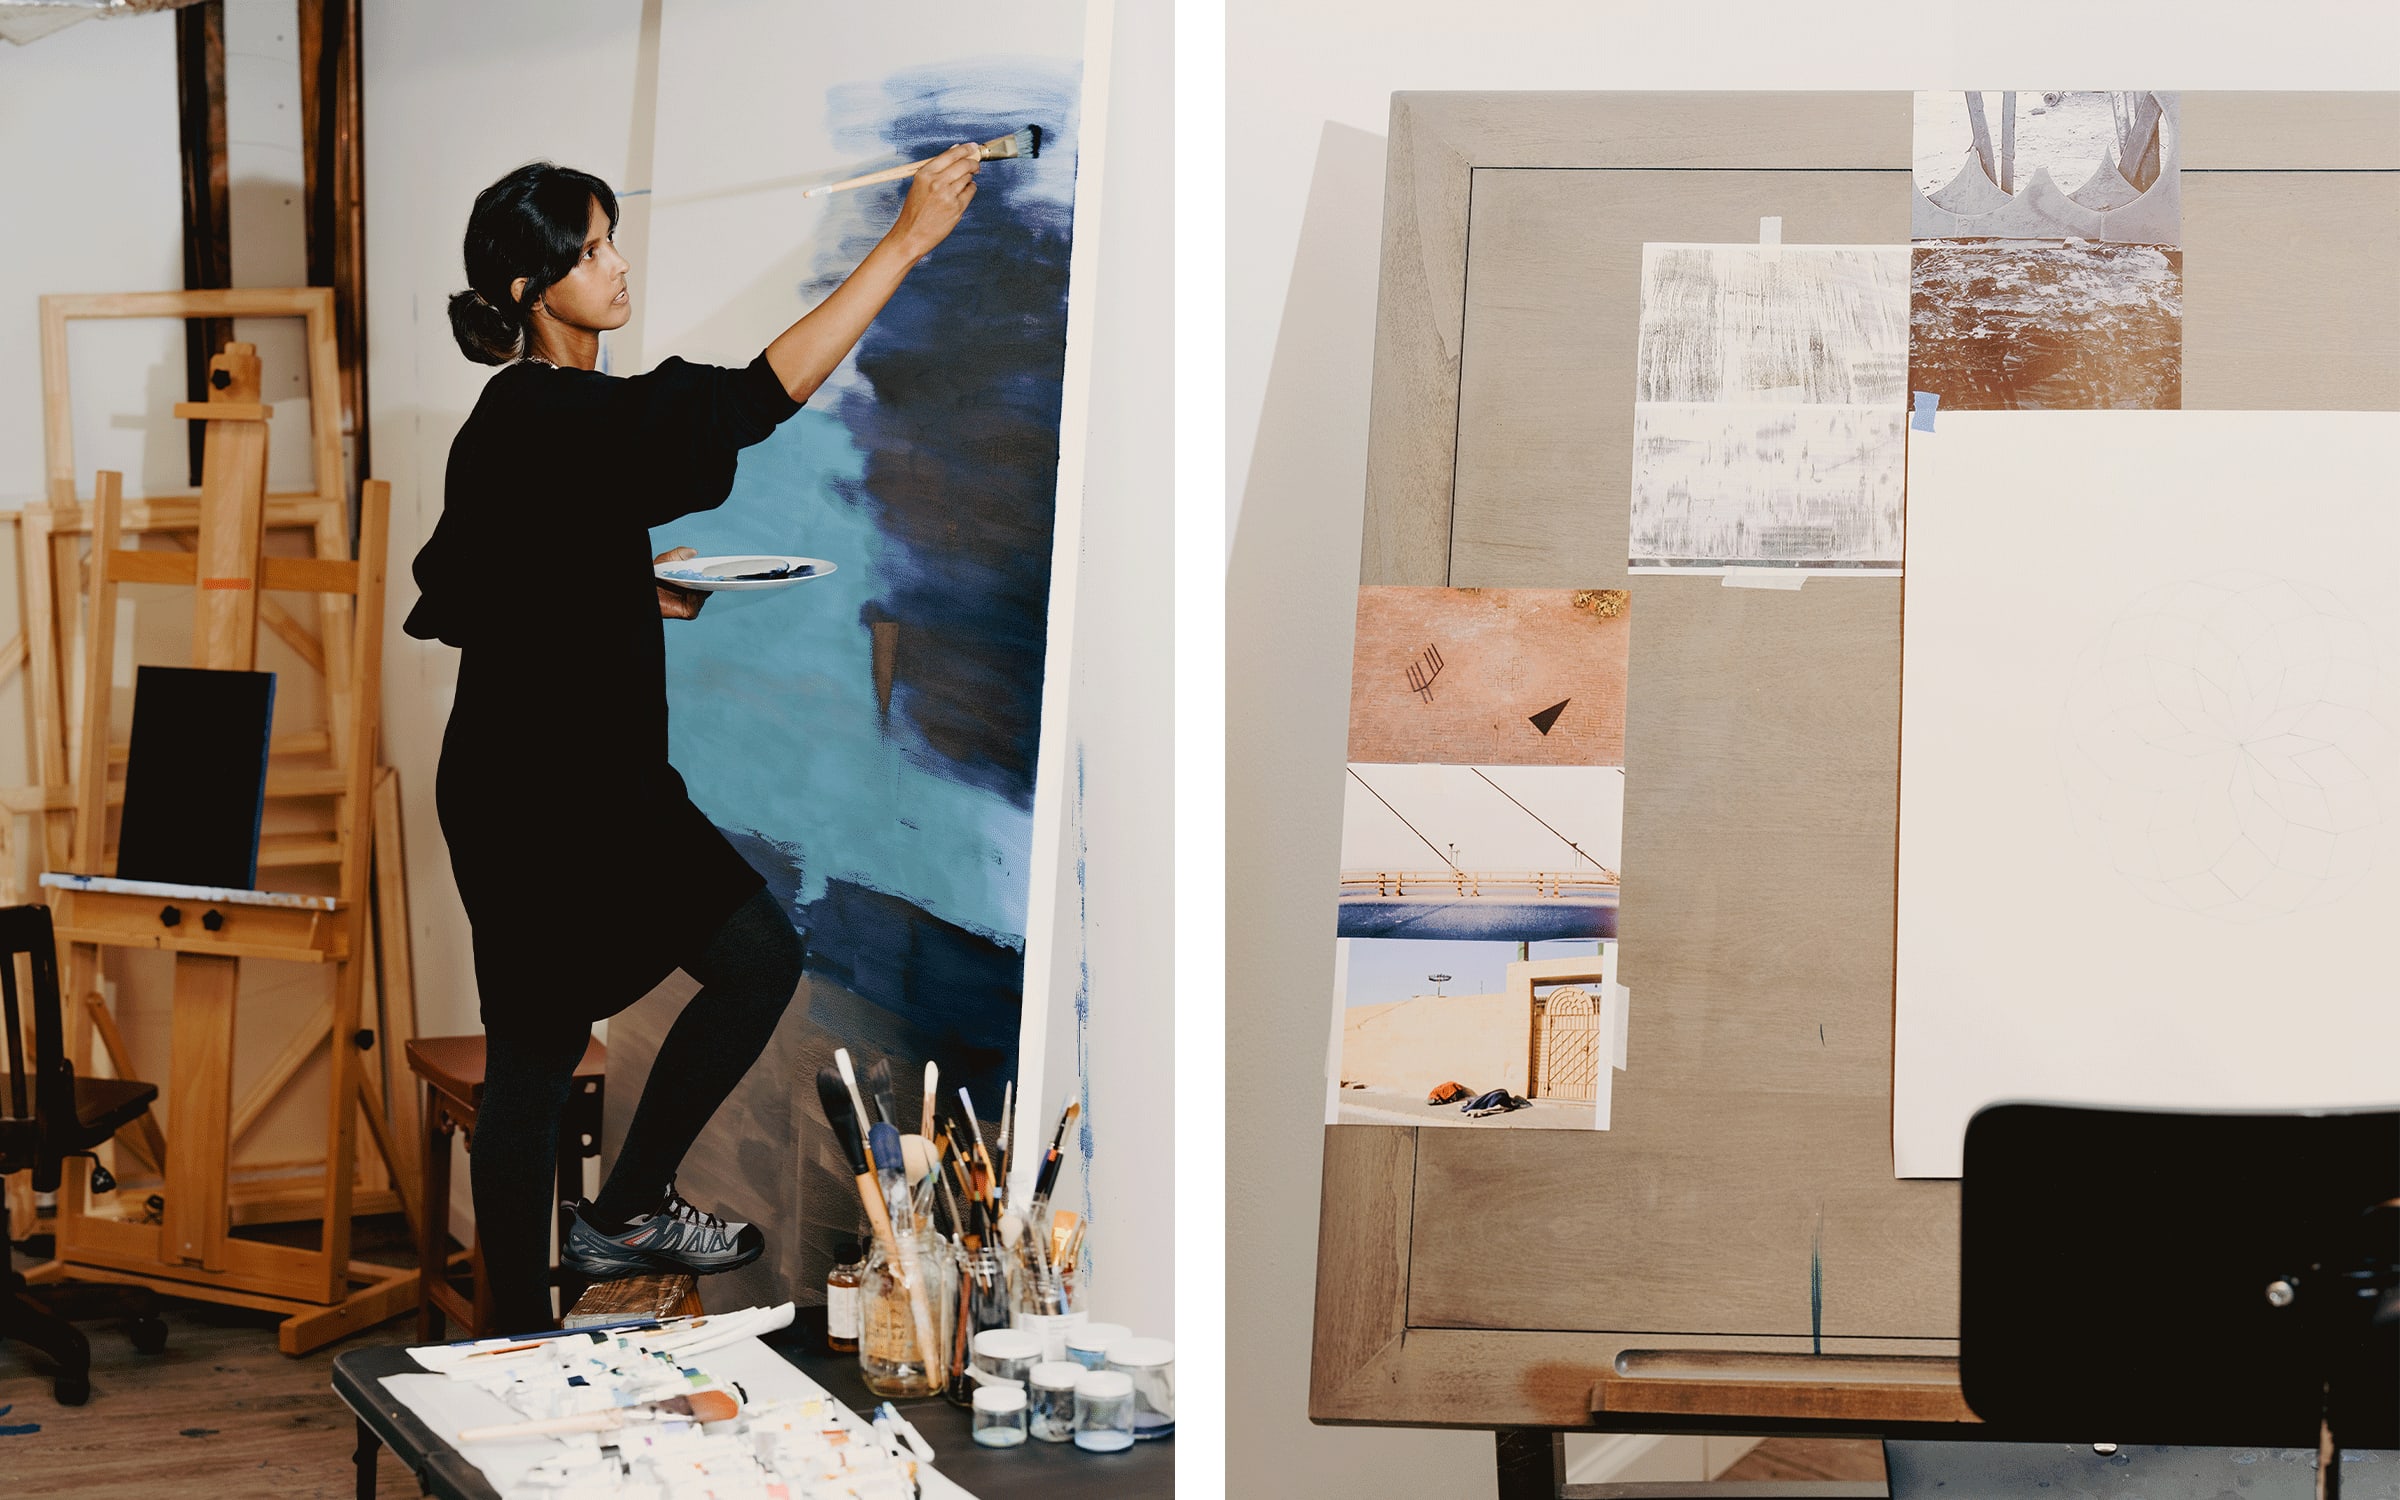 Ayesha Sultana in her studio. Photographs by Peyton Fulford for Art Basel.